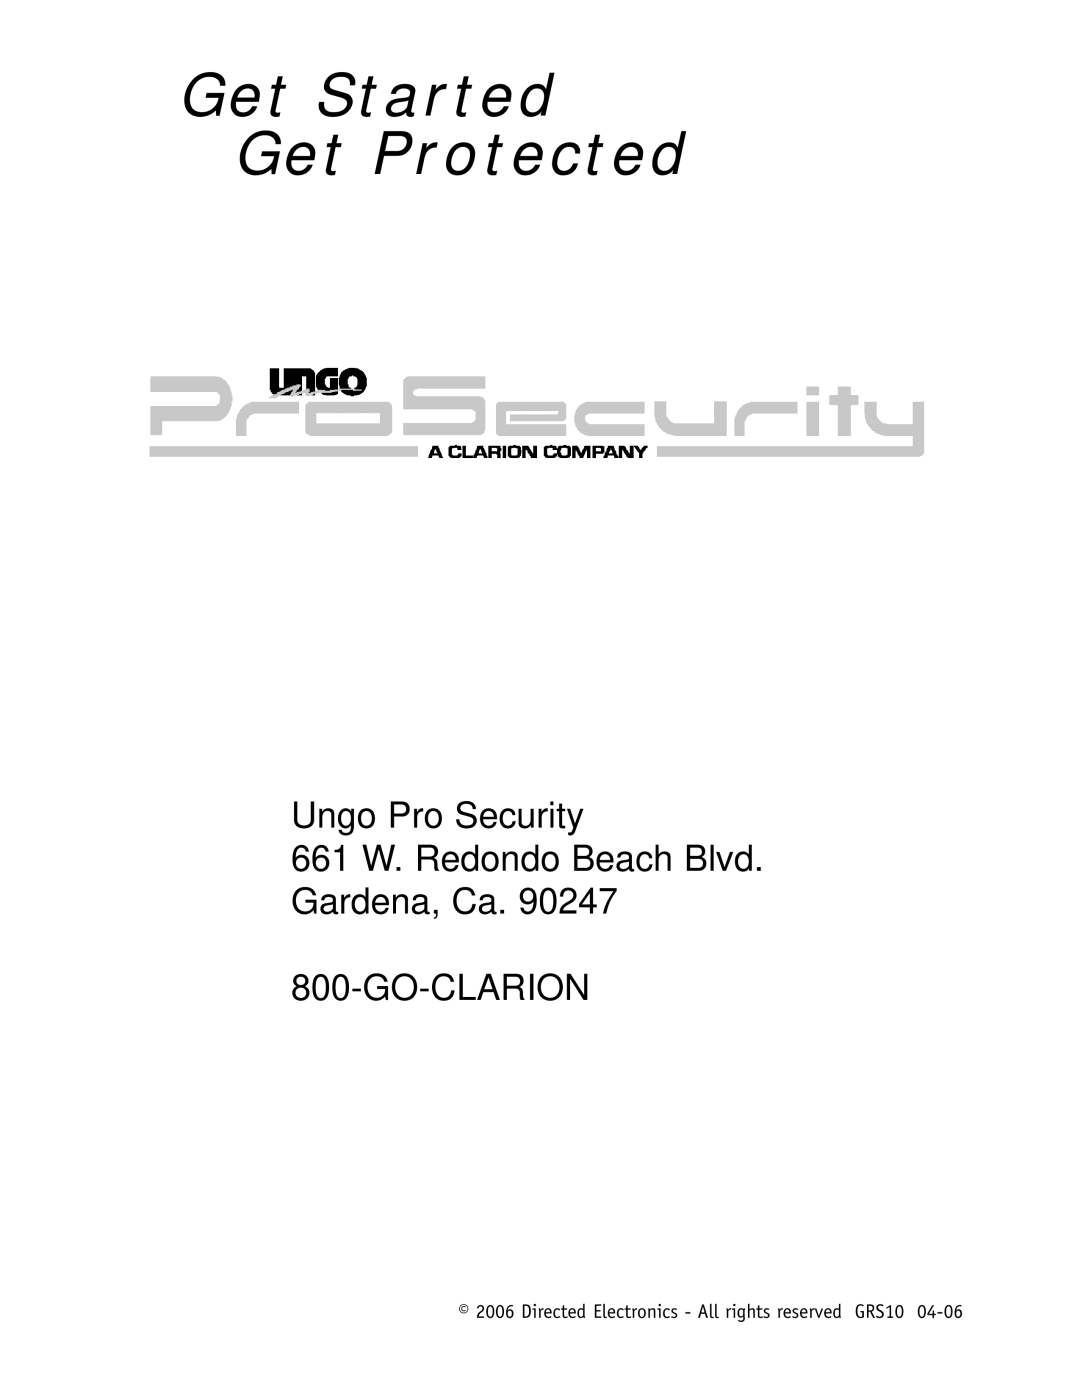 Clarion RS10 manual Get Started Get Protected, Ungo Pro Security 661 W. Redondo Beach Blvd, Gardena, Ca. 800-GO-CLARION 